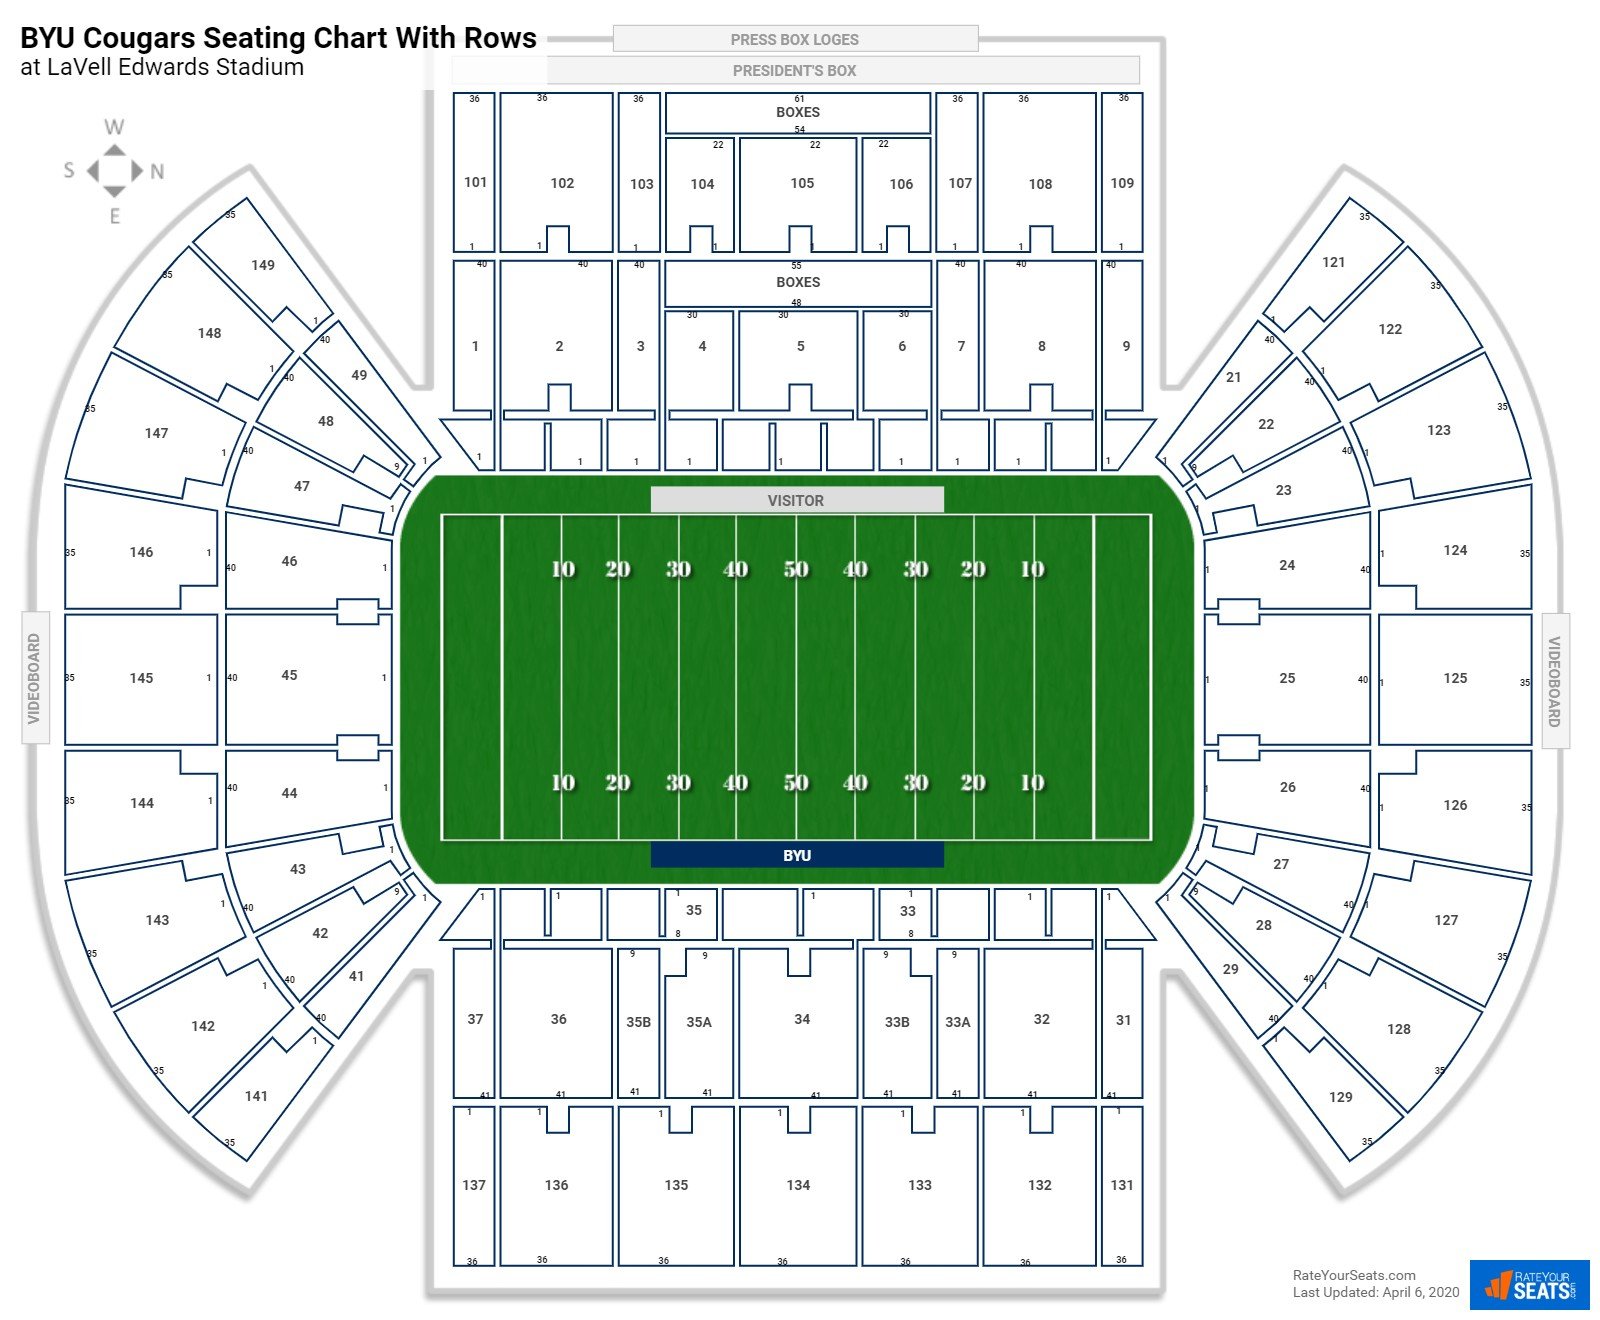 LaVell Edwards Stadium seating chart with row numbers